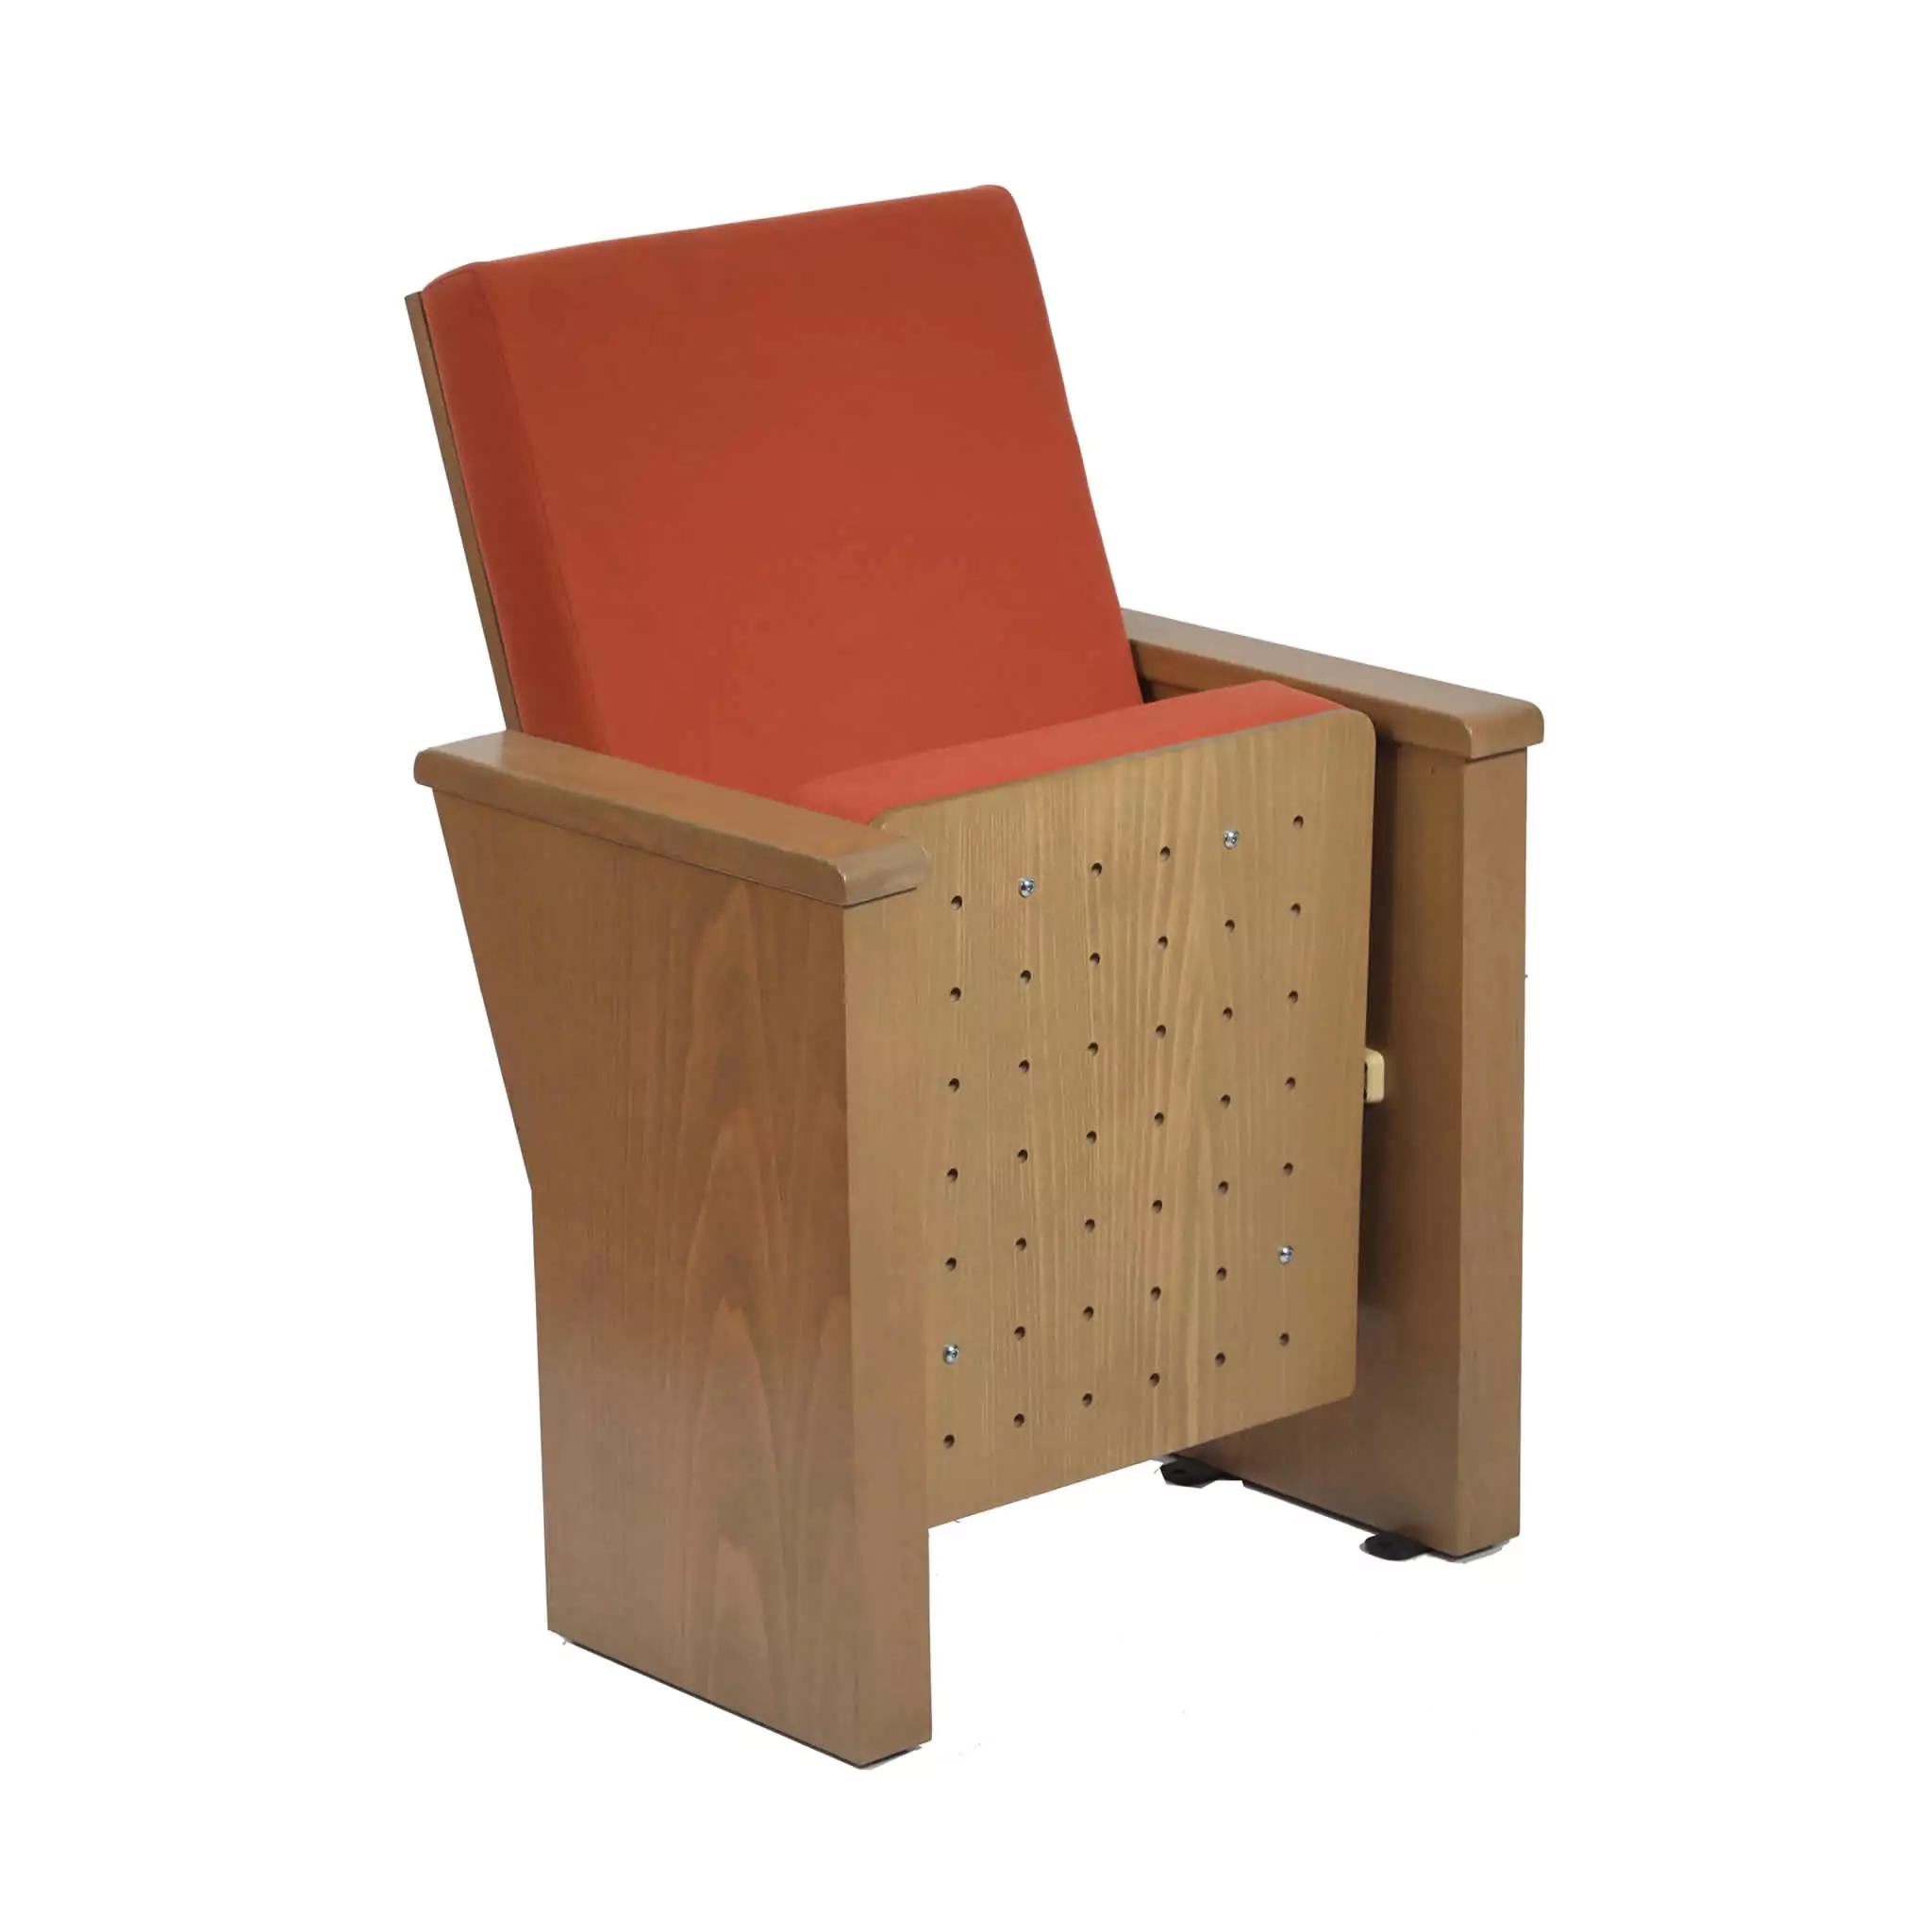 Simko Seating Products Conference Seat Kuvars 02